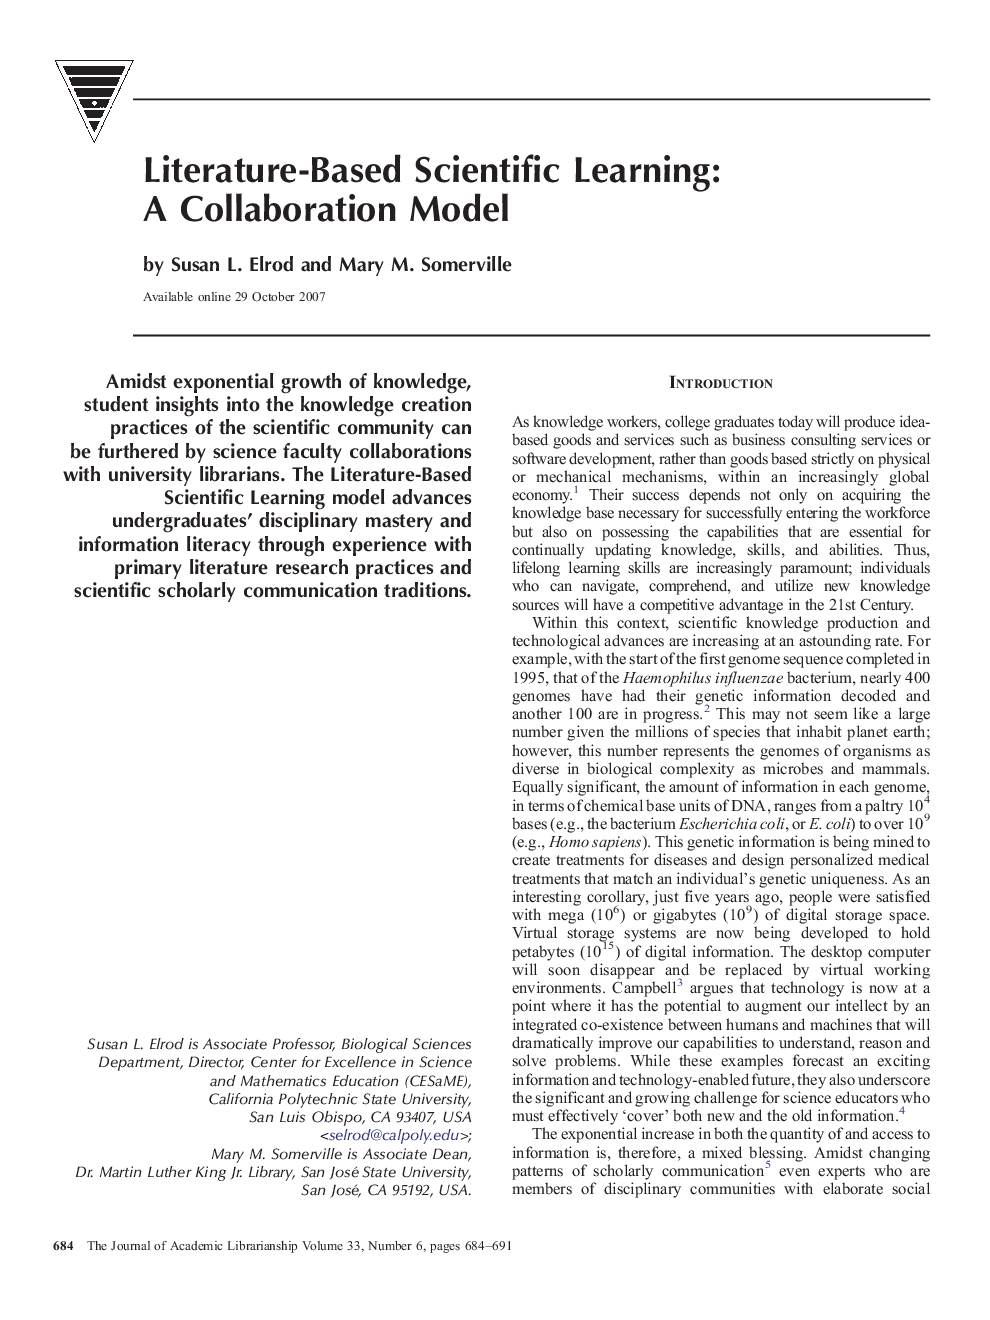 Literature-Based Scientific Learning: A Collaboration Model